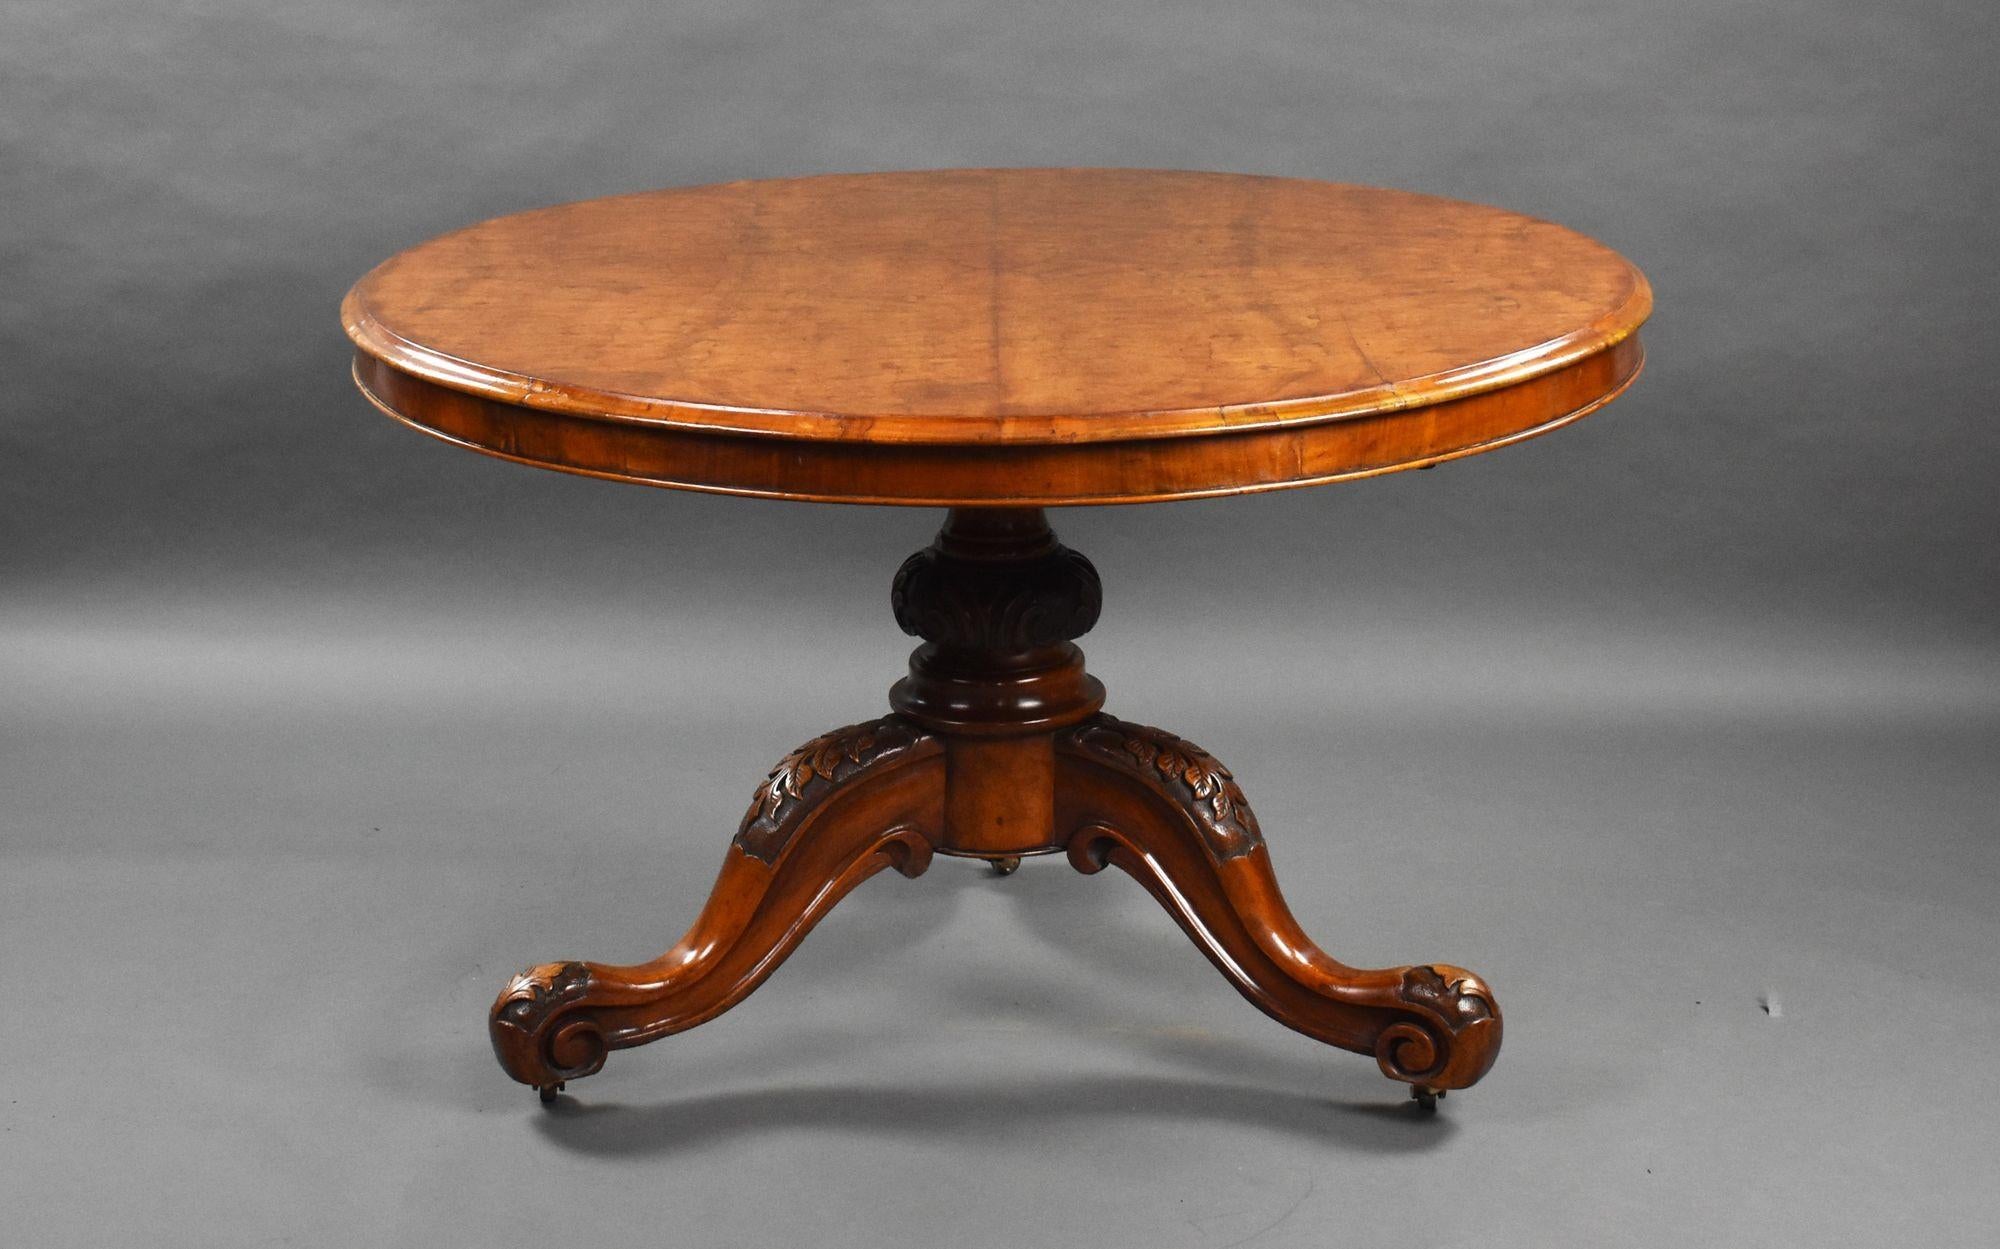 For sale is a good quality Victorian burr walnut round breakfast table, having a turned and carved base, with out swept legs raised on castors, the table remains in very good condition.
Width: 116cm Depth: 116cm Height: 73cm